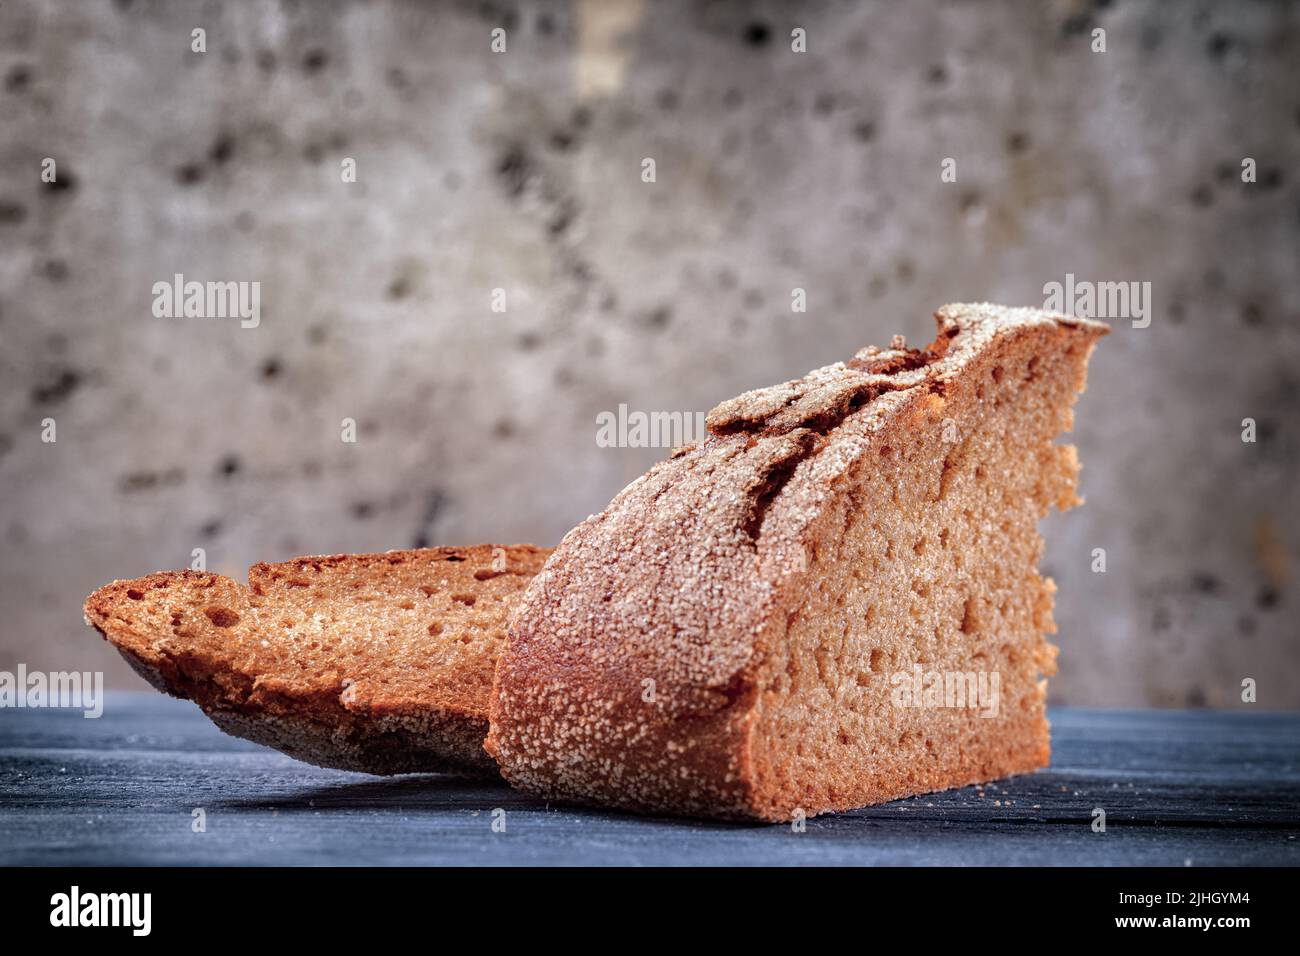 Two pieces of bread on a wooden table against a rough wall. Simple food theme still life Stock Photo